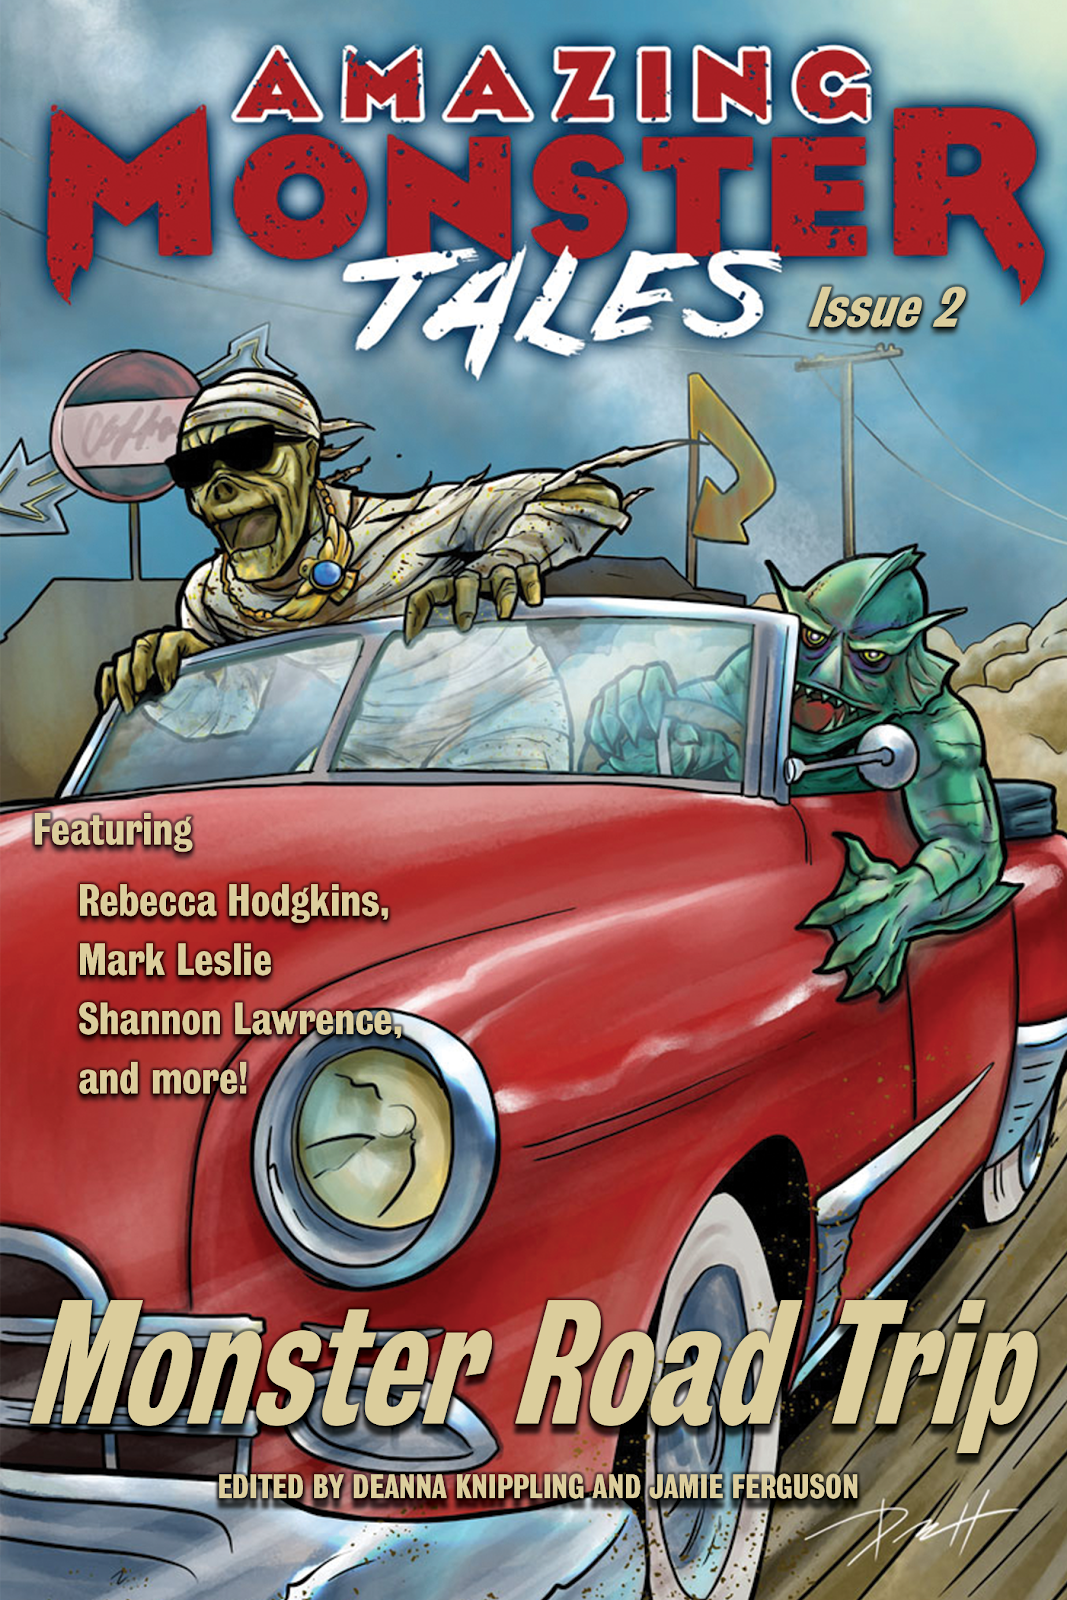 Amazing Monster Tales #2